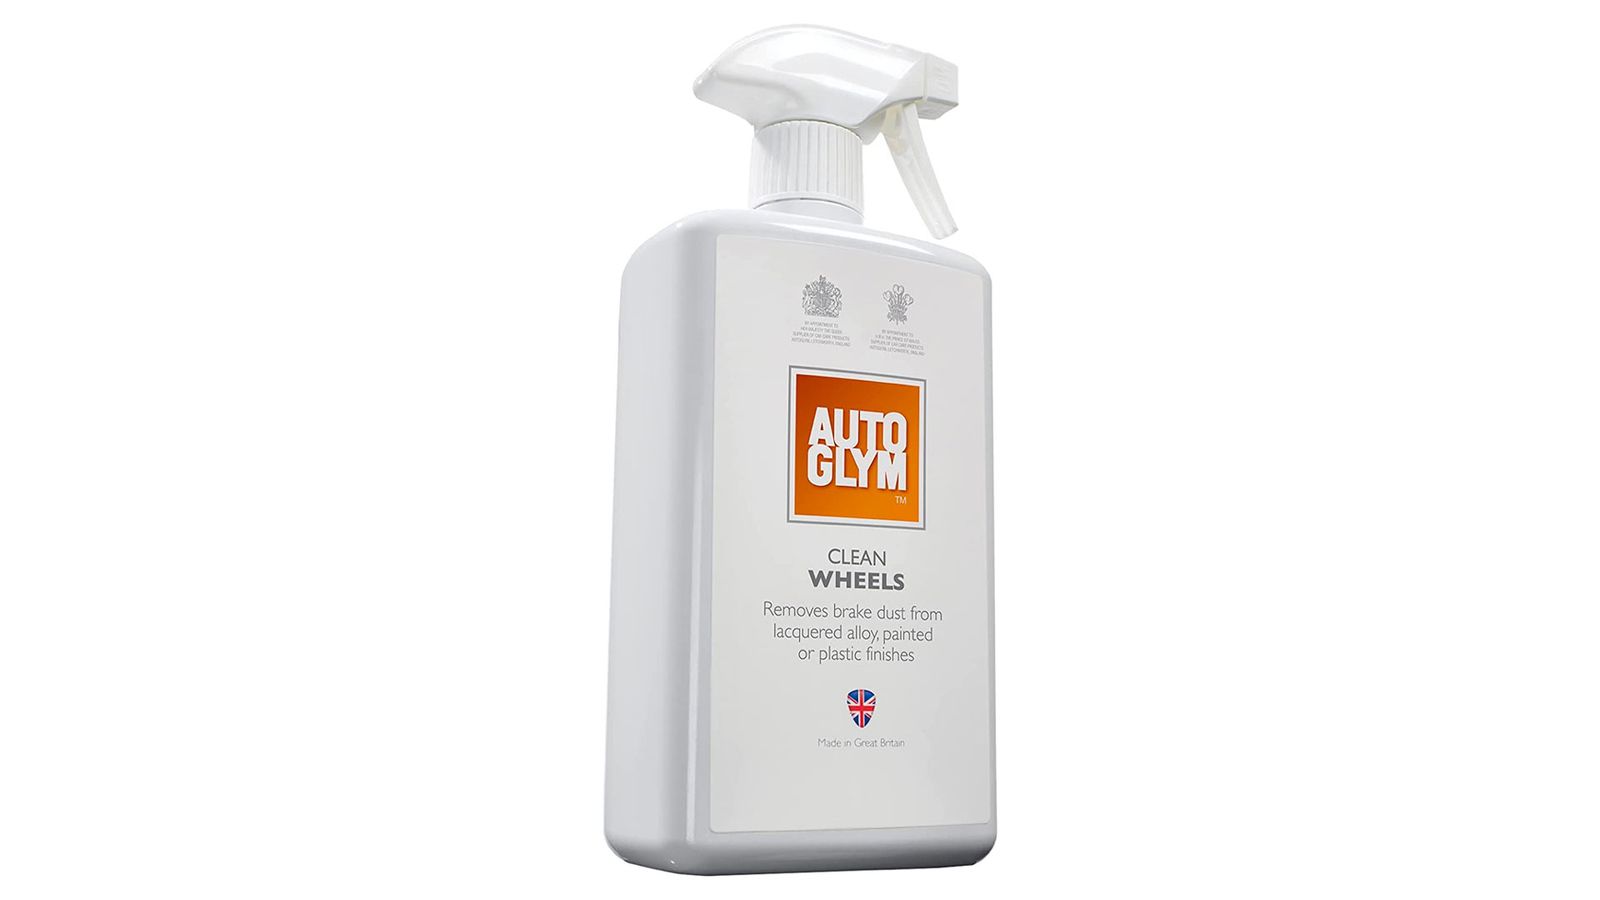 Autoglym Clean Wheels product image of a white spray bottle with an orange label.